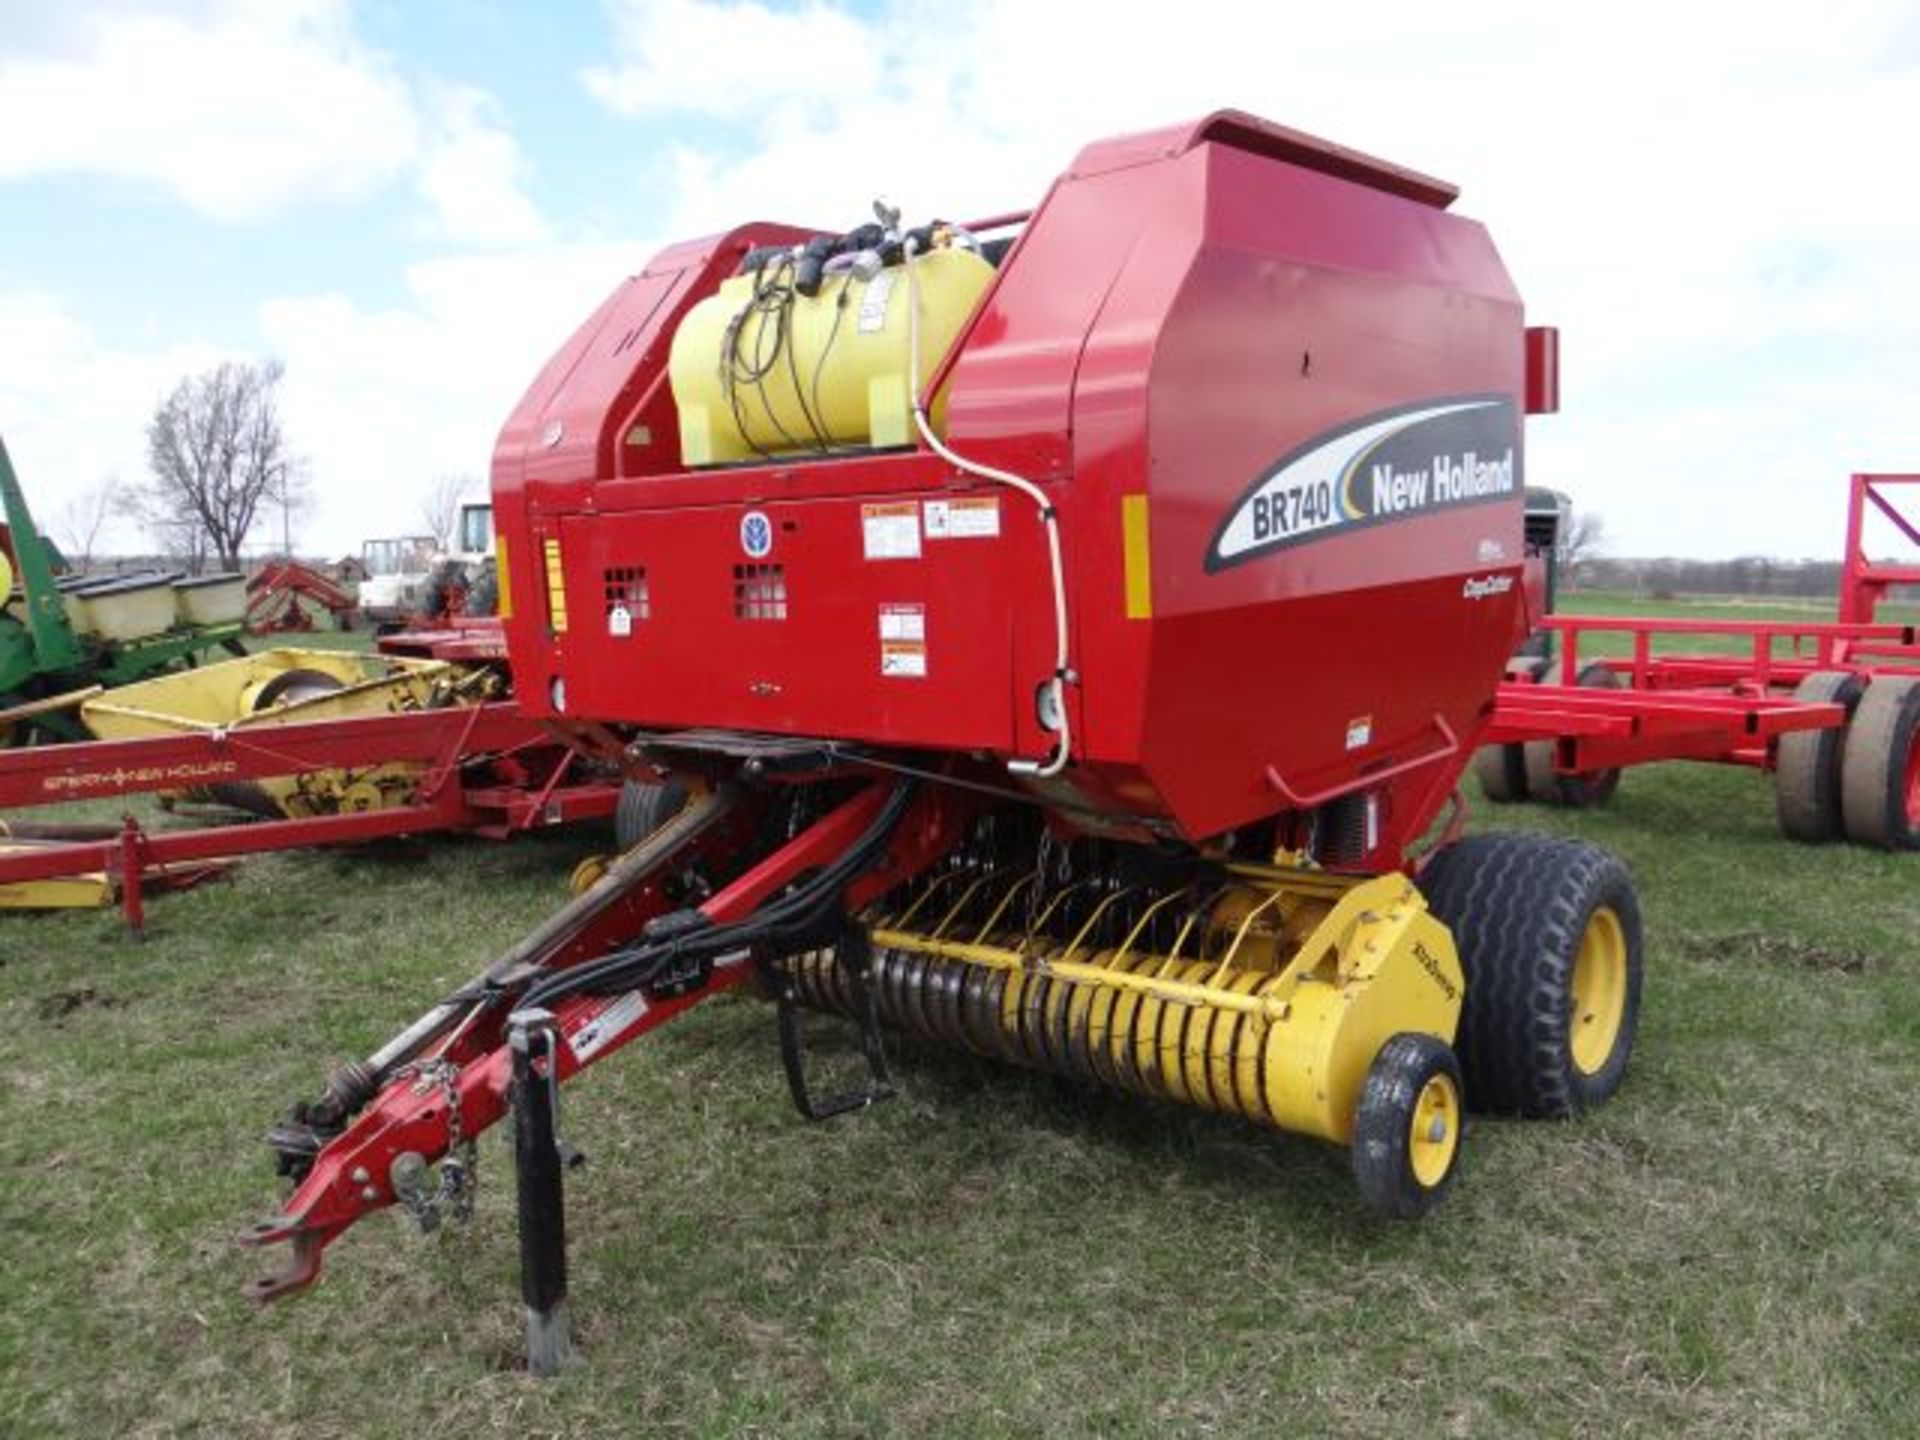 Lot 3055 NH BR740 Round Baler 4x5 Bales, w/Crop Cutter, Liquid Applicator, Net Wrap and Twine, Extra - Image 2 of 3